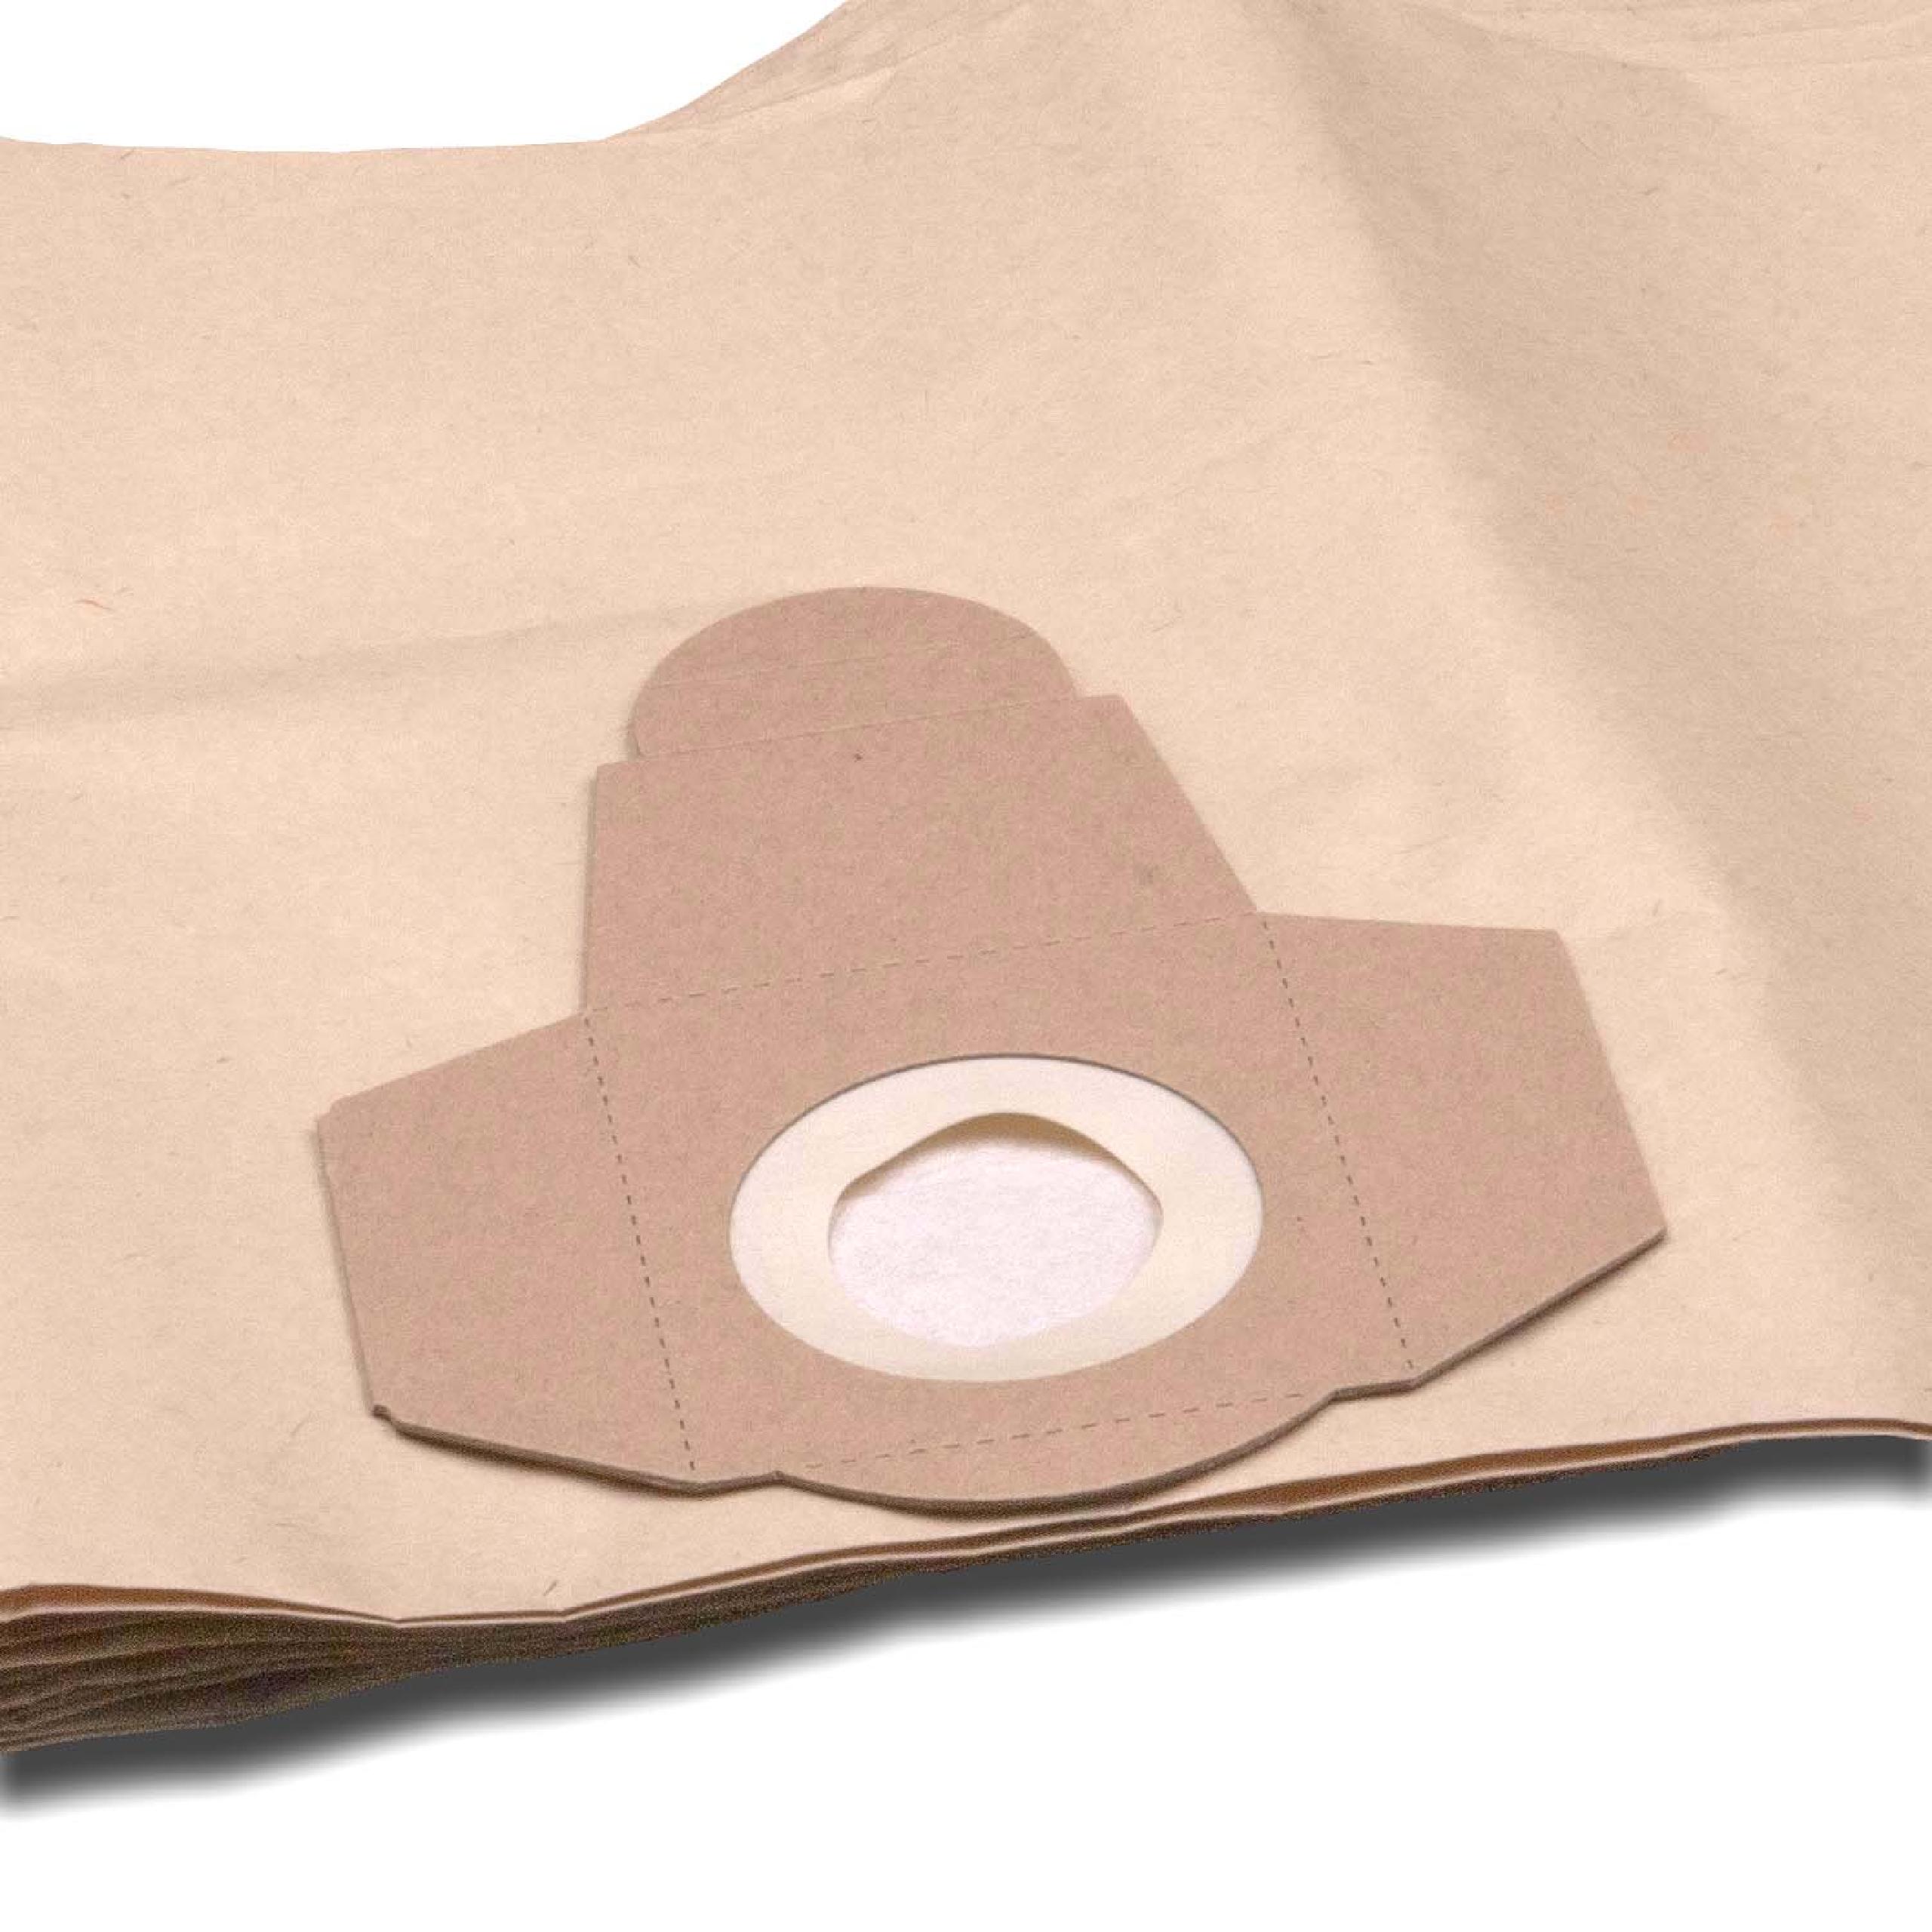 5x Vacuum Cleaner Bag suitable for 1250 Einhell Inox 1250 - paper